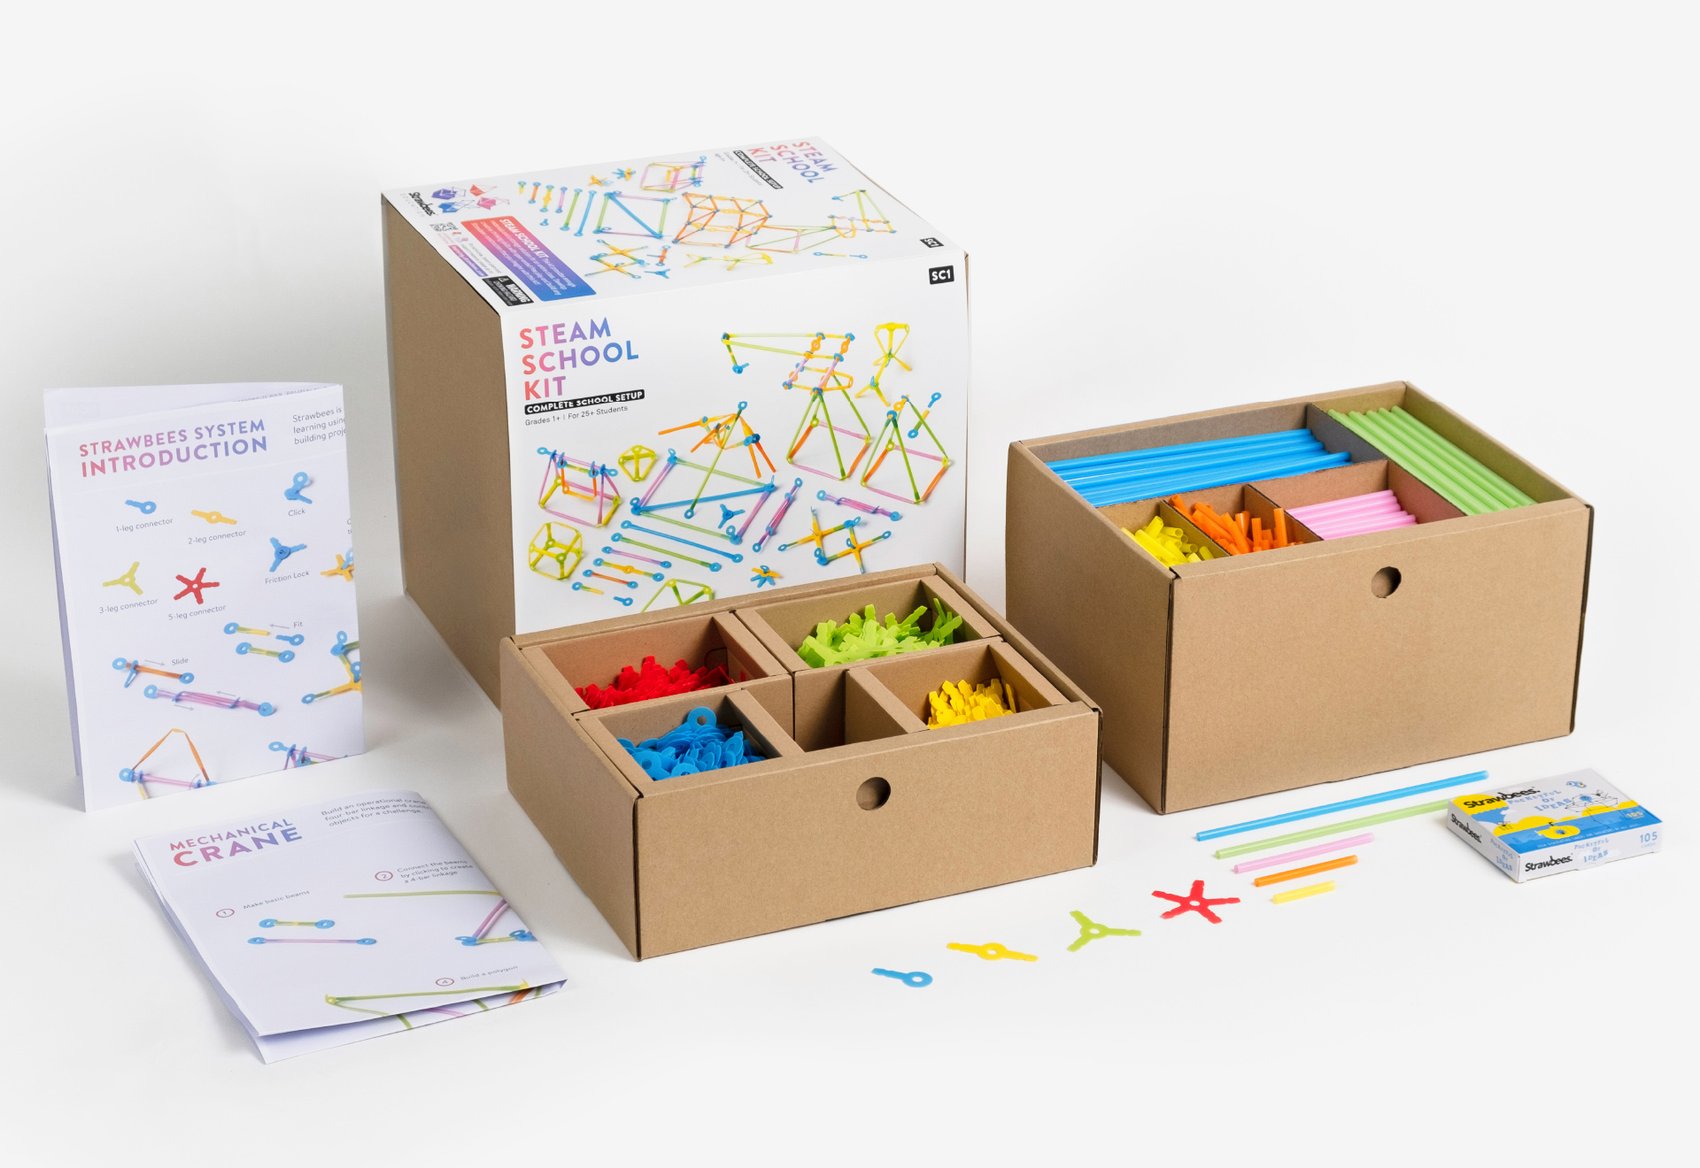 2_STEAM_School_Kit_with_license_Strawbees_box_with_unboxed_material-1